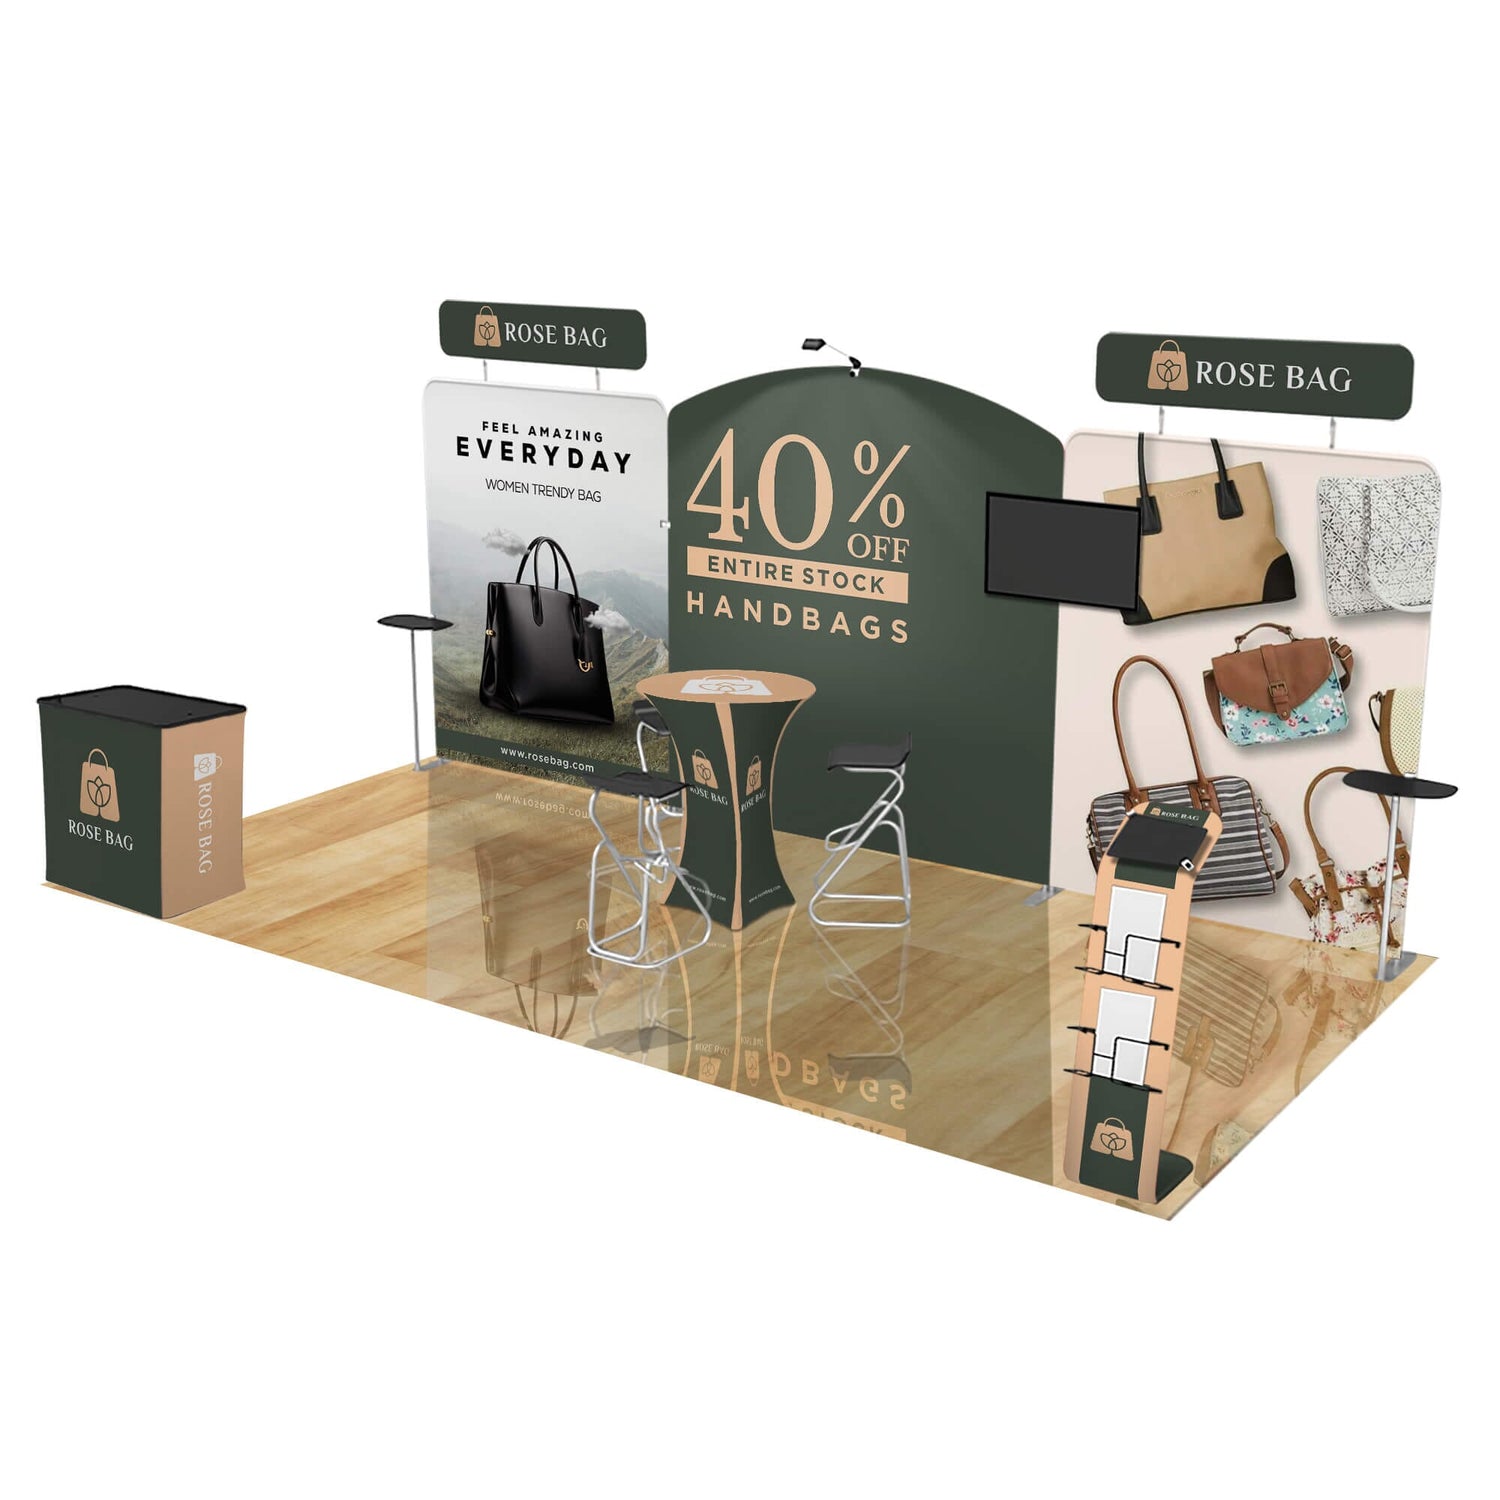 Trade Show Booth Kits & Displays, 10x20 Canopy Tent